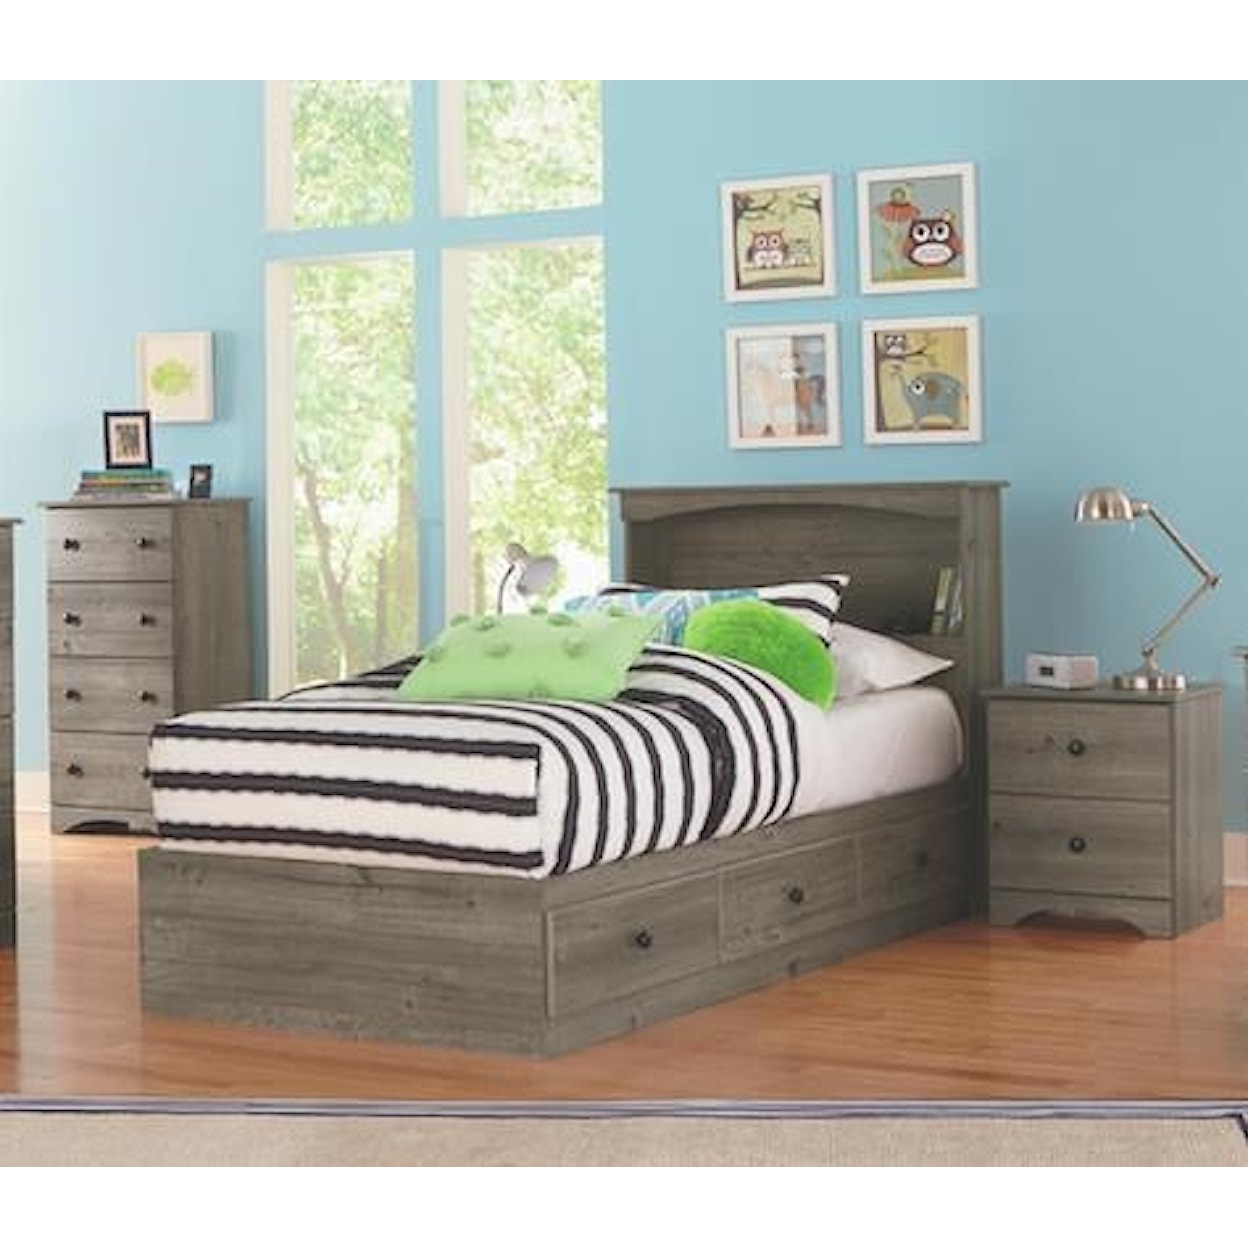 Perdue 13000 Series 3 Piece Full Bookcase Headboard Group